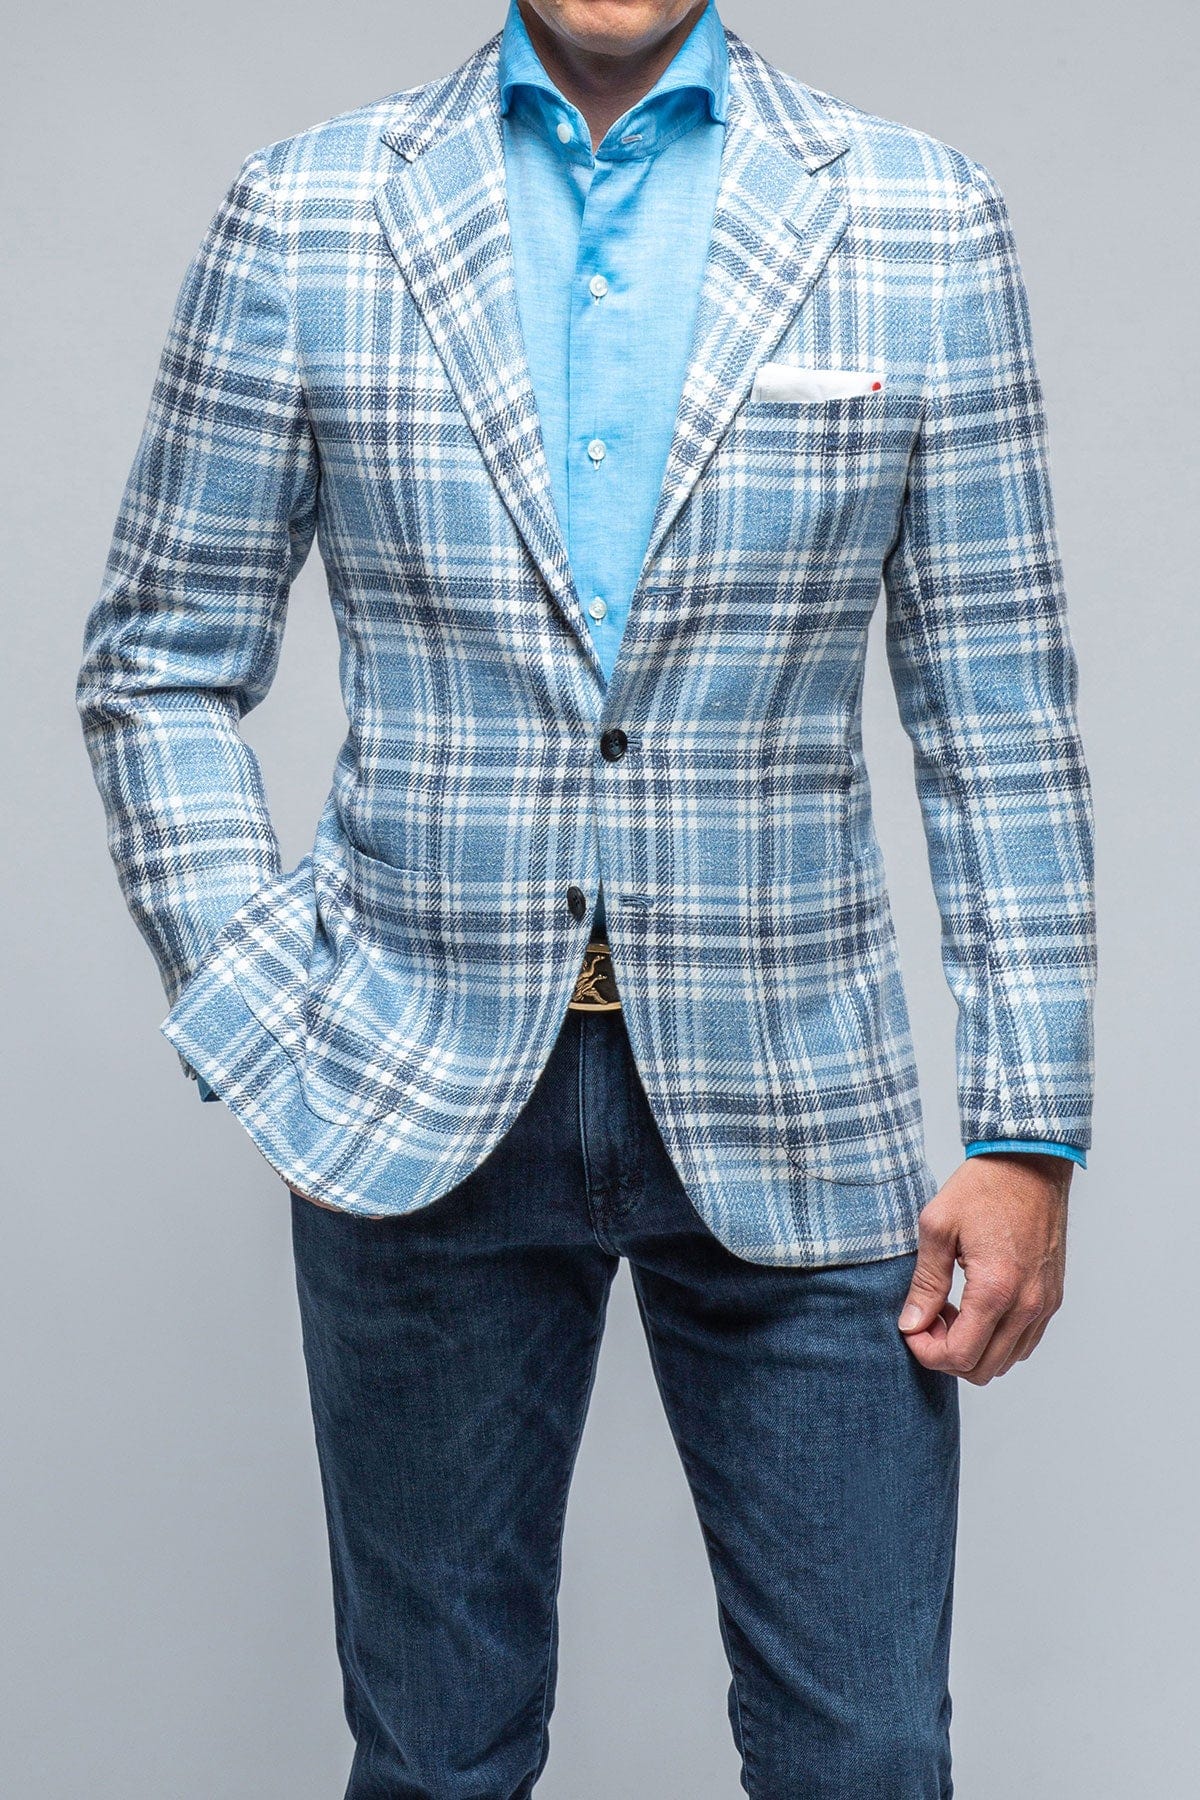 St. Remy Blue Navy and White Check Jacket